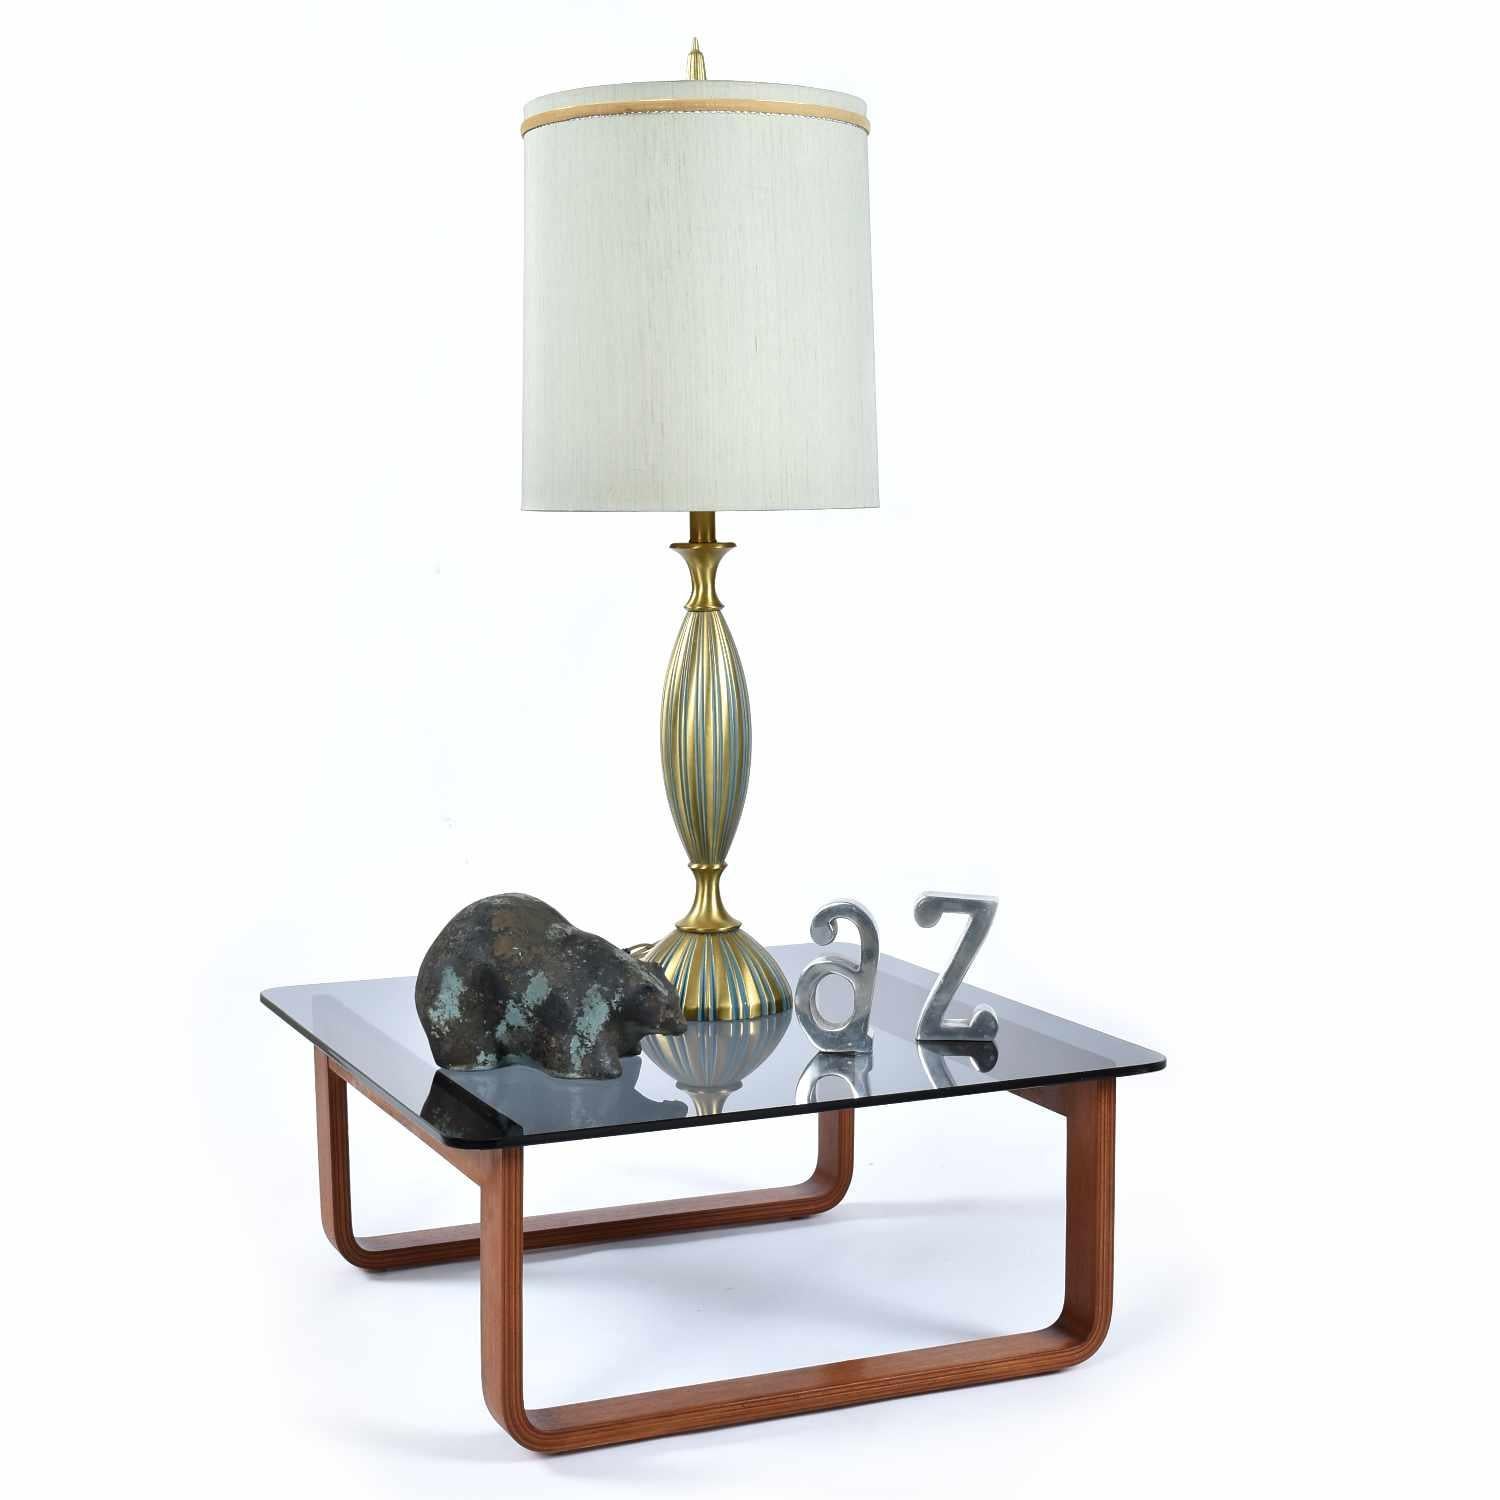 Rembrandt Teal and Gold Hourglass Shaped Midcentury Table Lamp In Excellent Condition For Sale In Chattanooga, TN